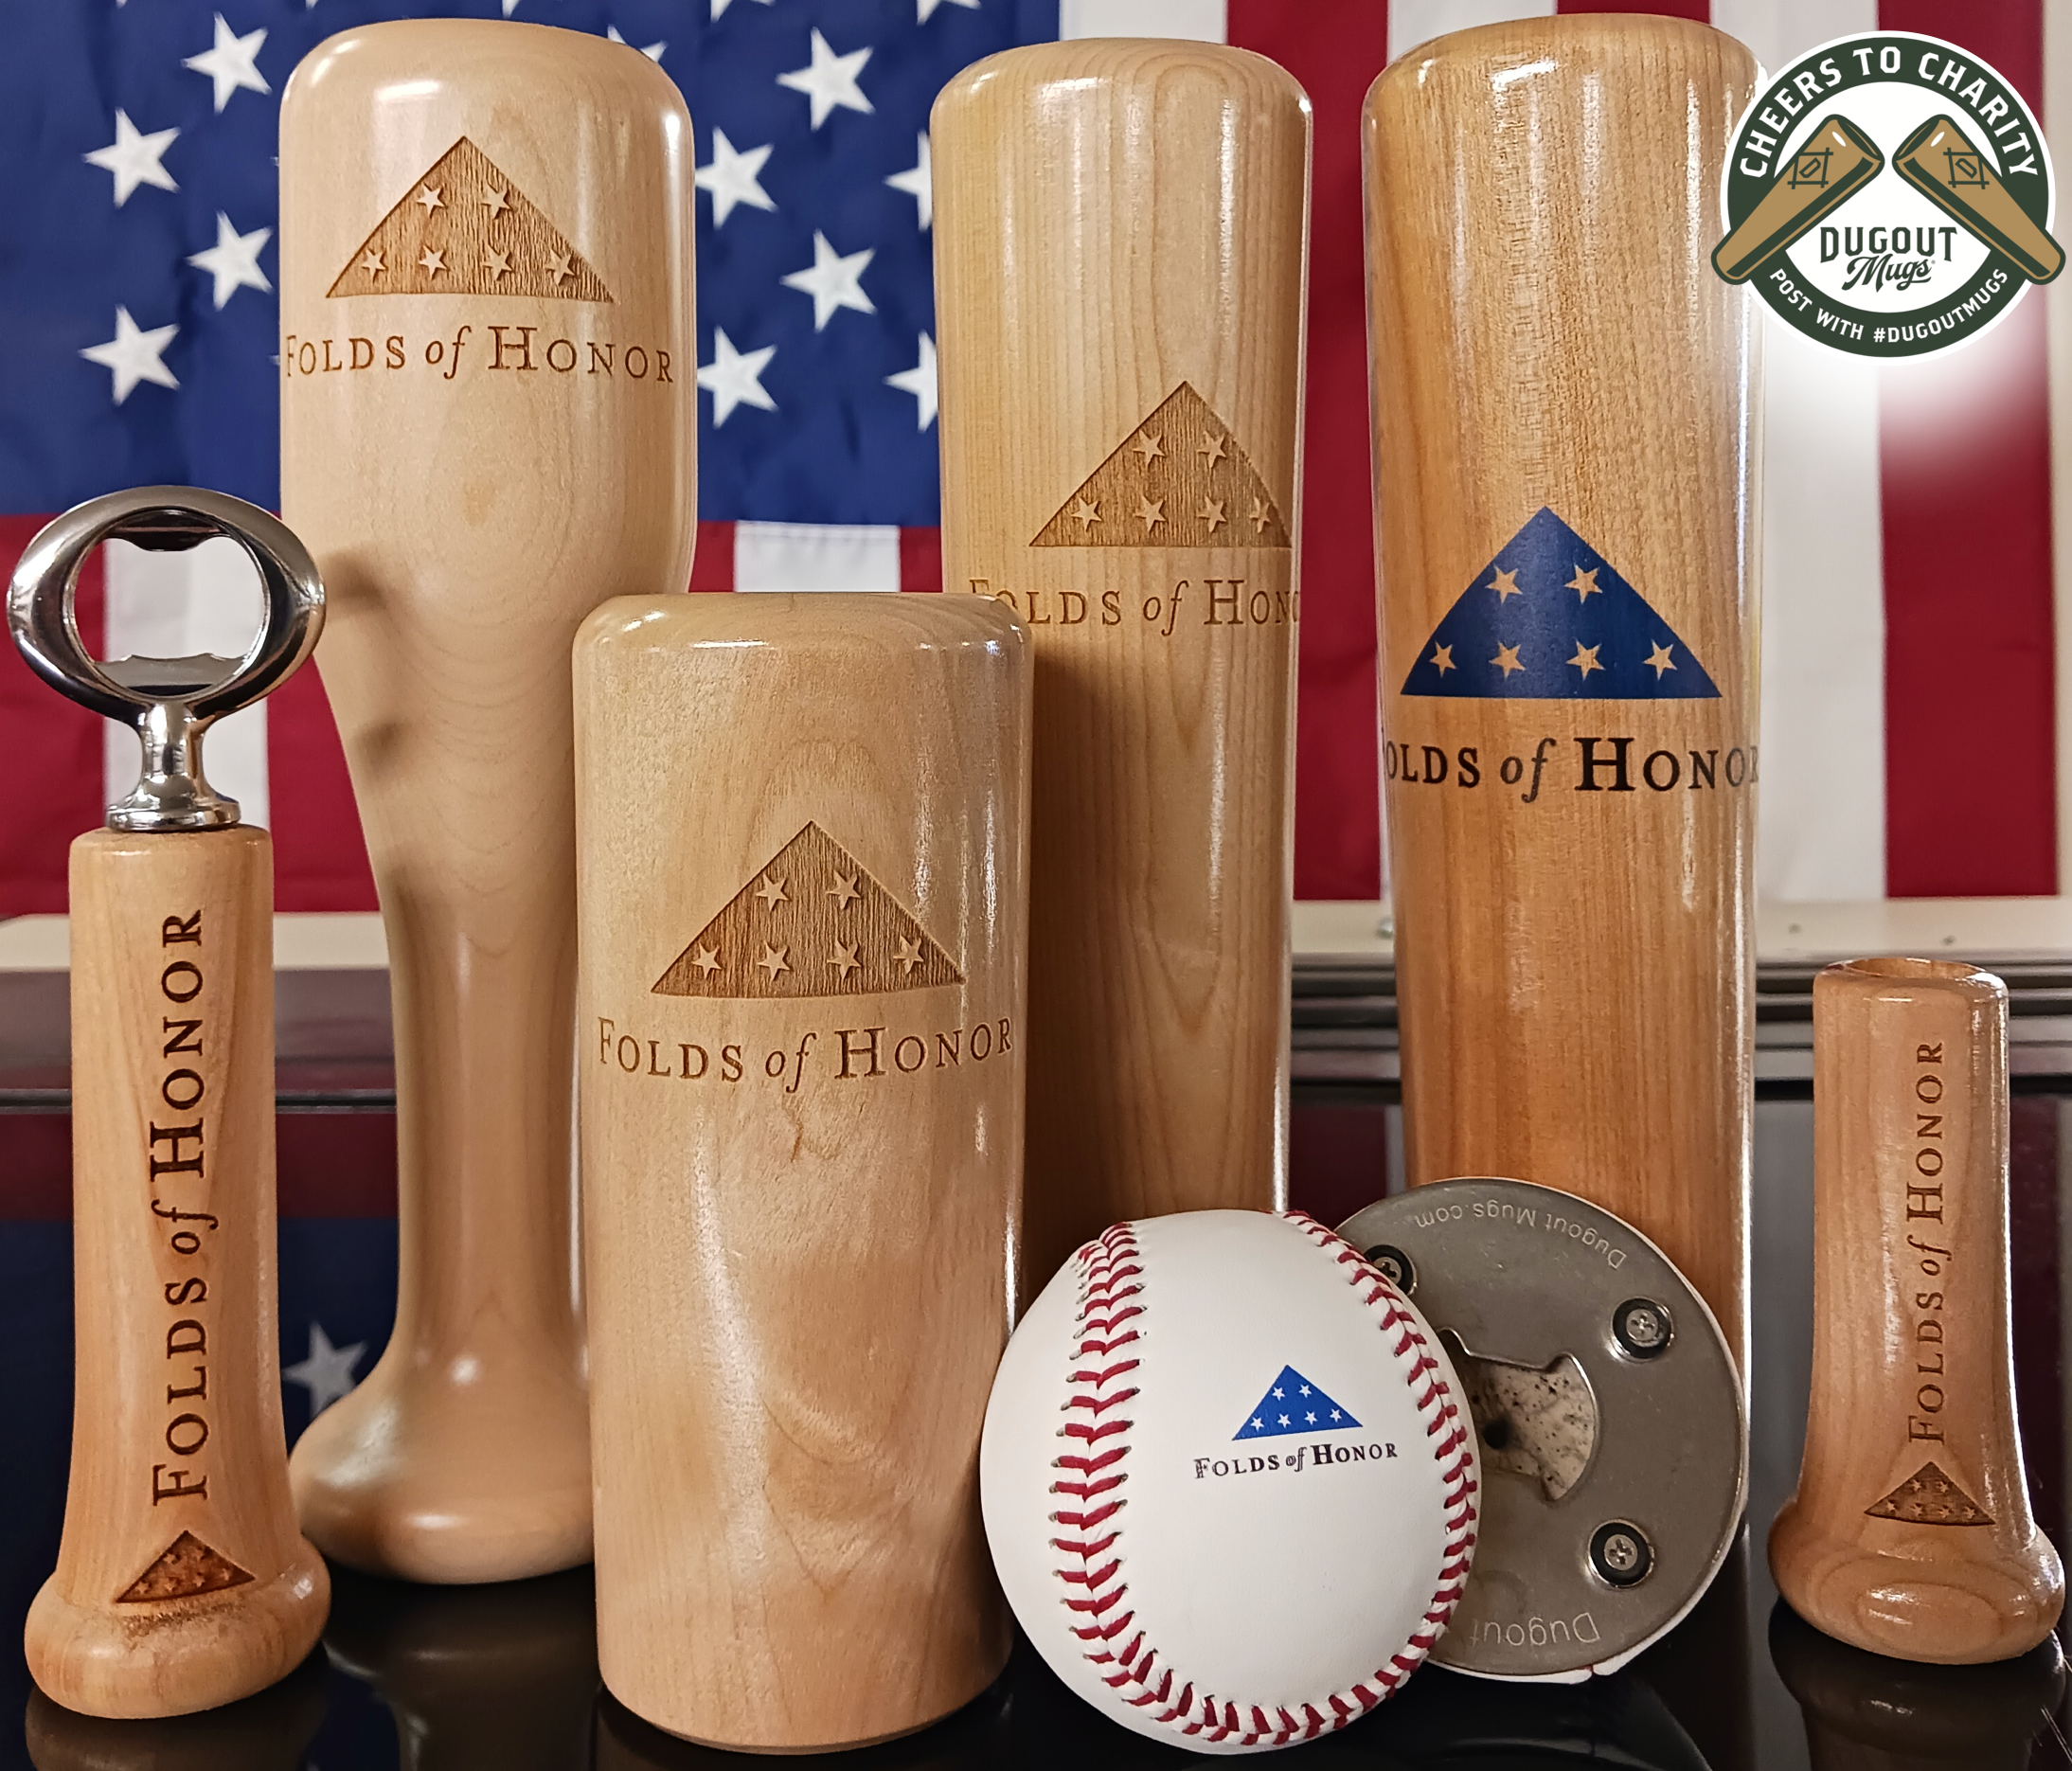 Dugout Mugs® Honoring the Fallen with Folds of Honor!